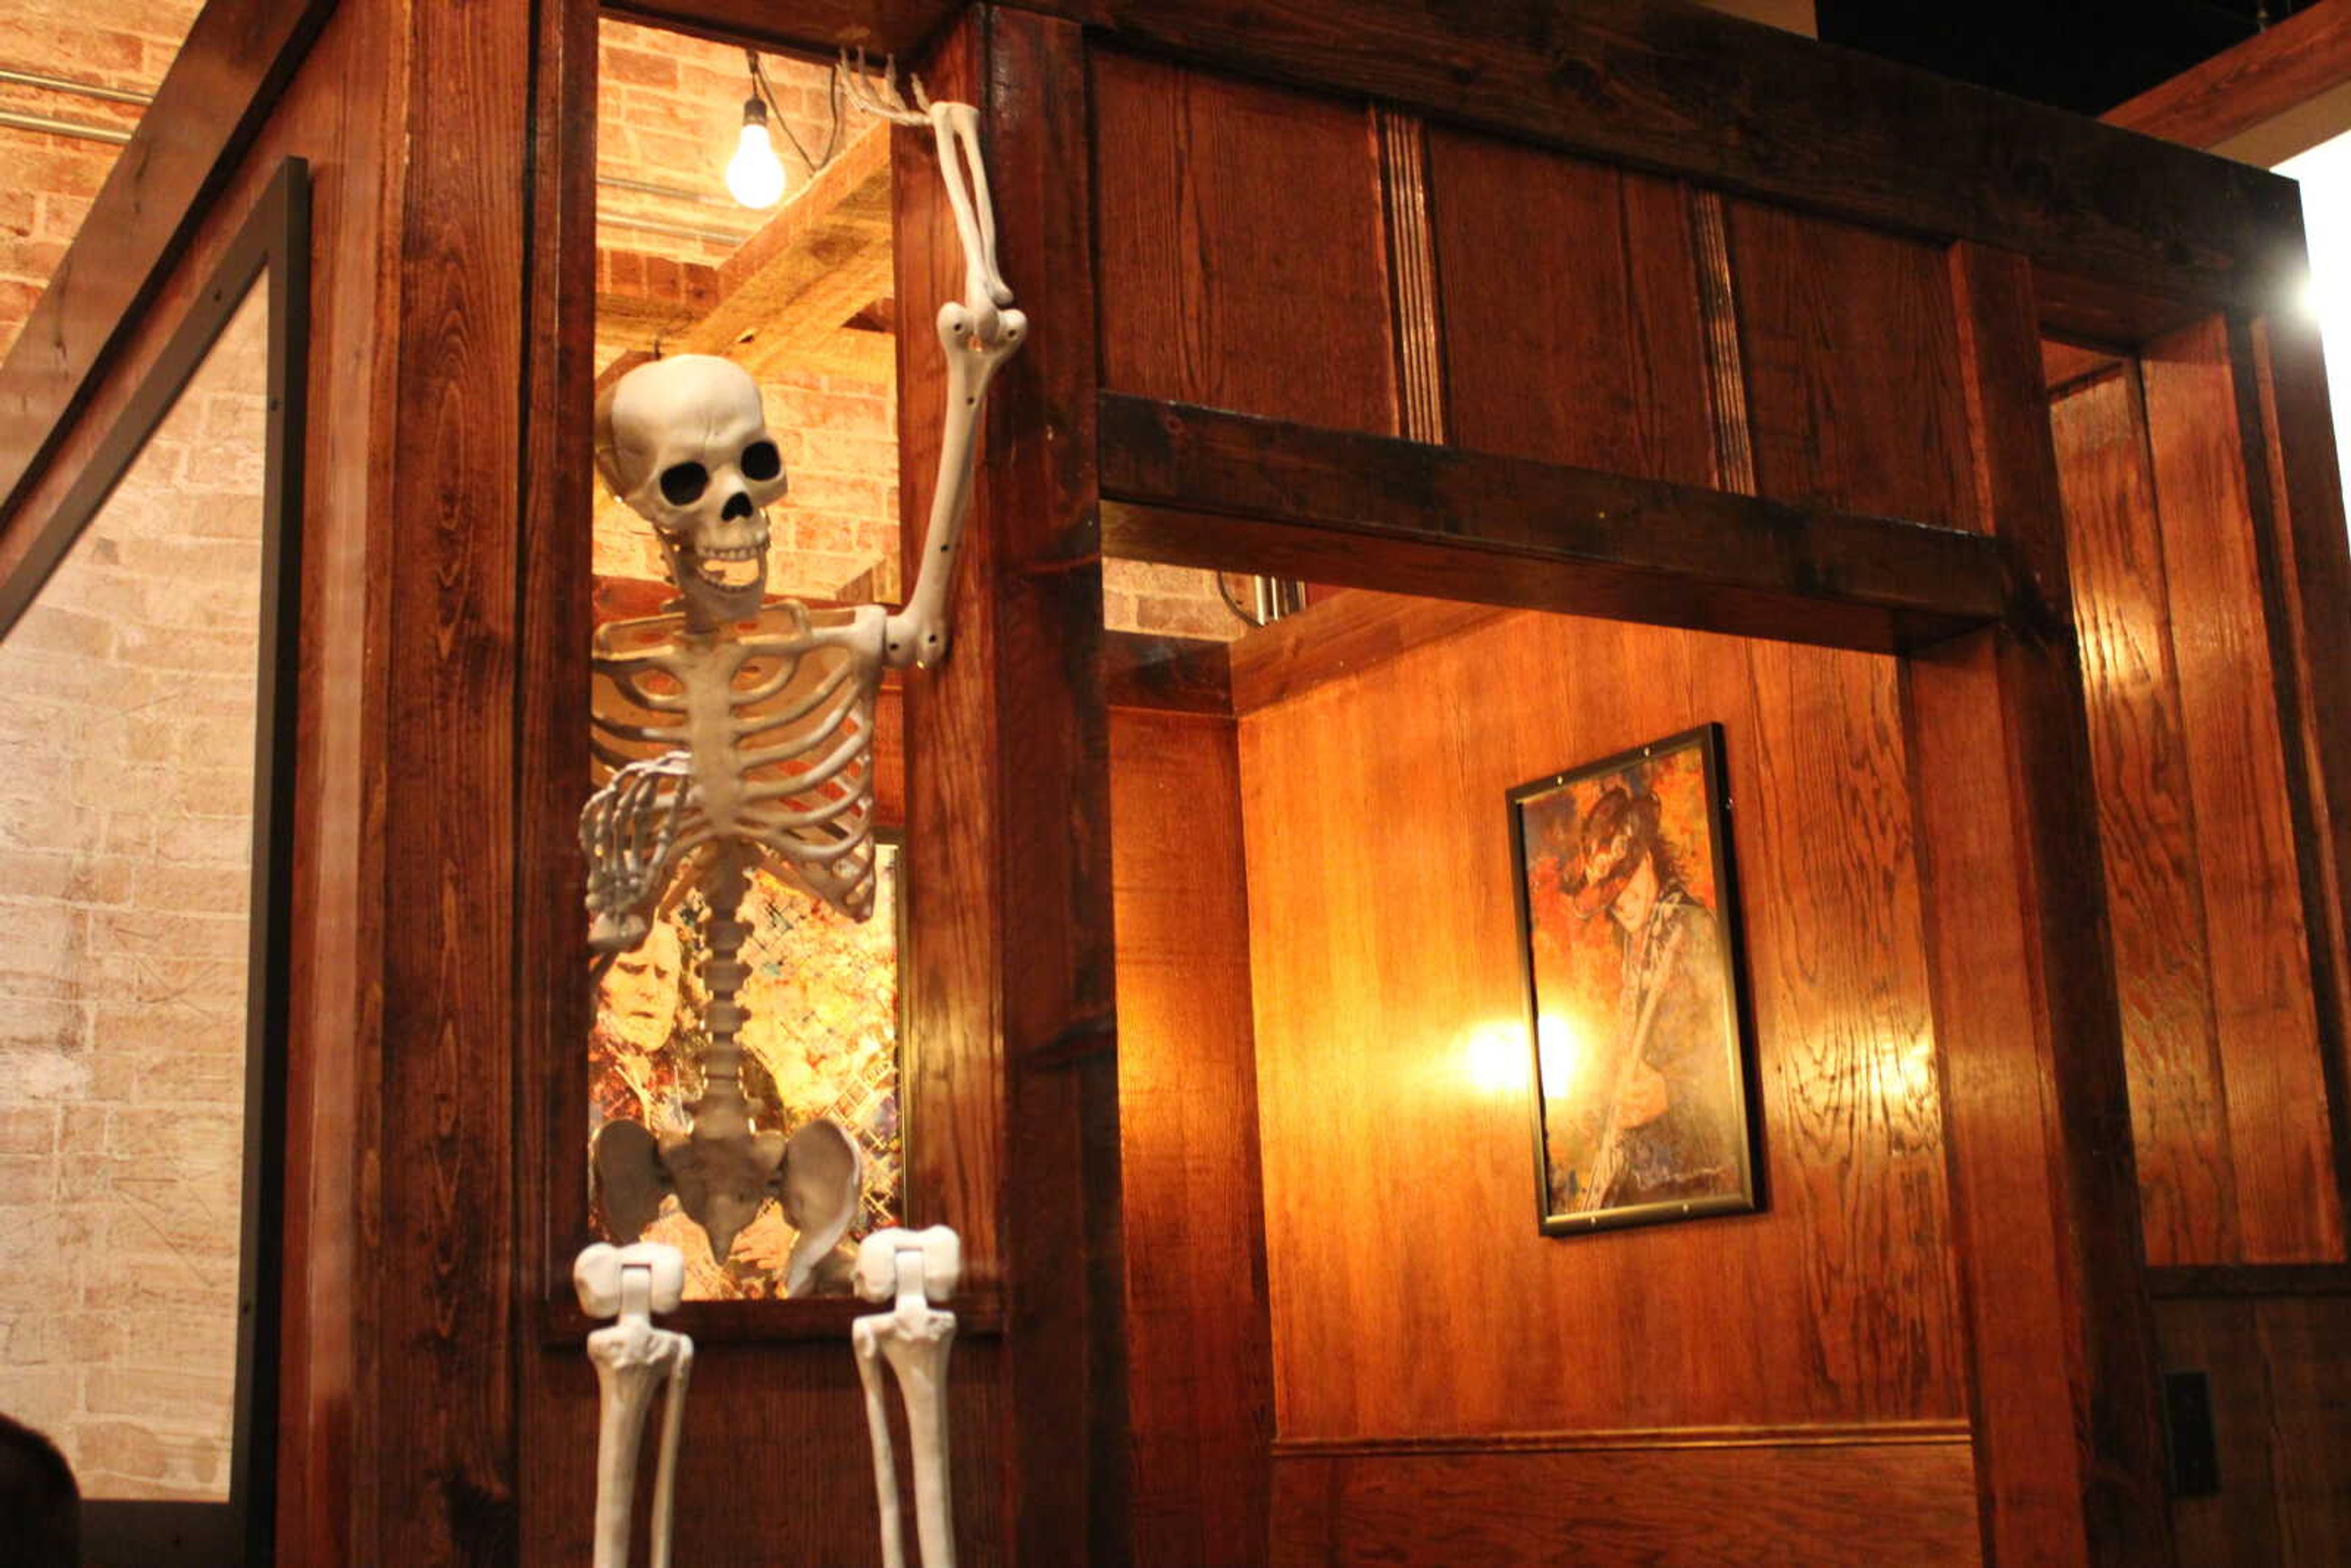 Minglewood Brewery in Downtown Cape is known among its staff to be haunted by a non-threatening spirit that makes sure to bring attention to itself in unexplainable ways, general manager Audry Helms said. This year, the entire skeleton prop was placed on a ledge rather than just the skull they had last year, as the skull seemed to be an easier target for the spirit to interact with.